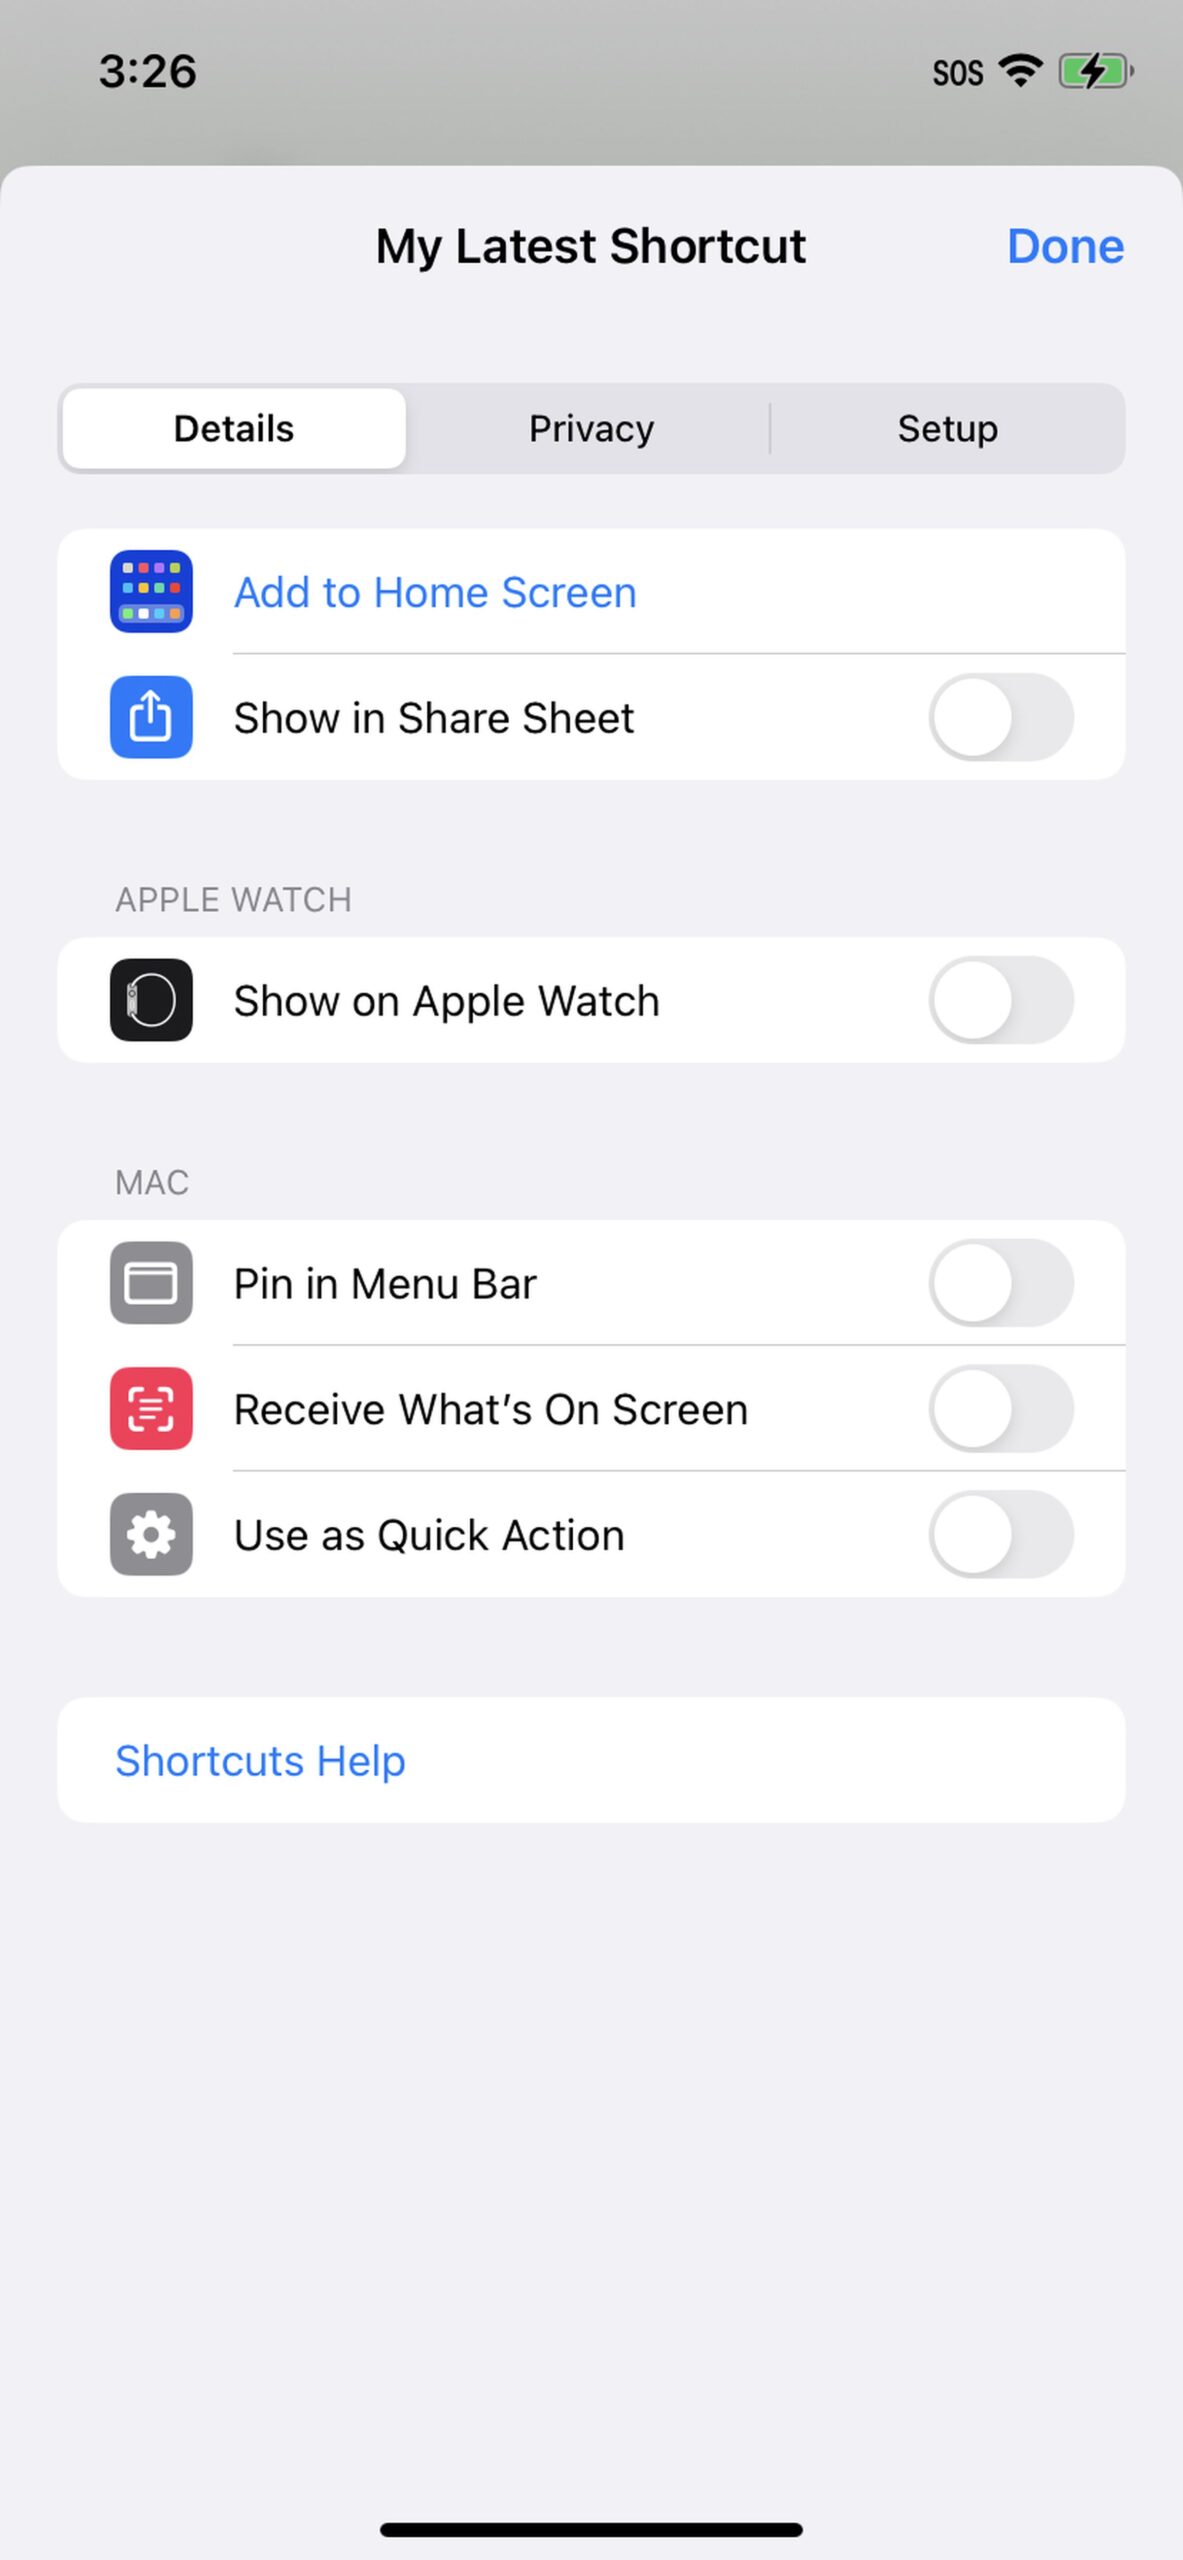 Shortcut details and other features.